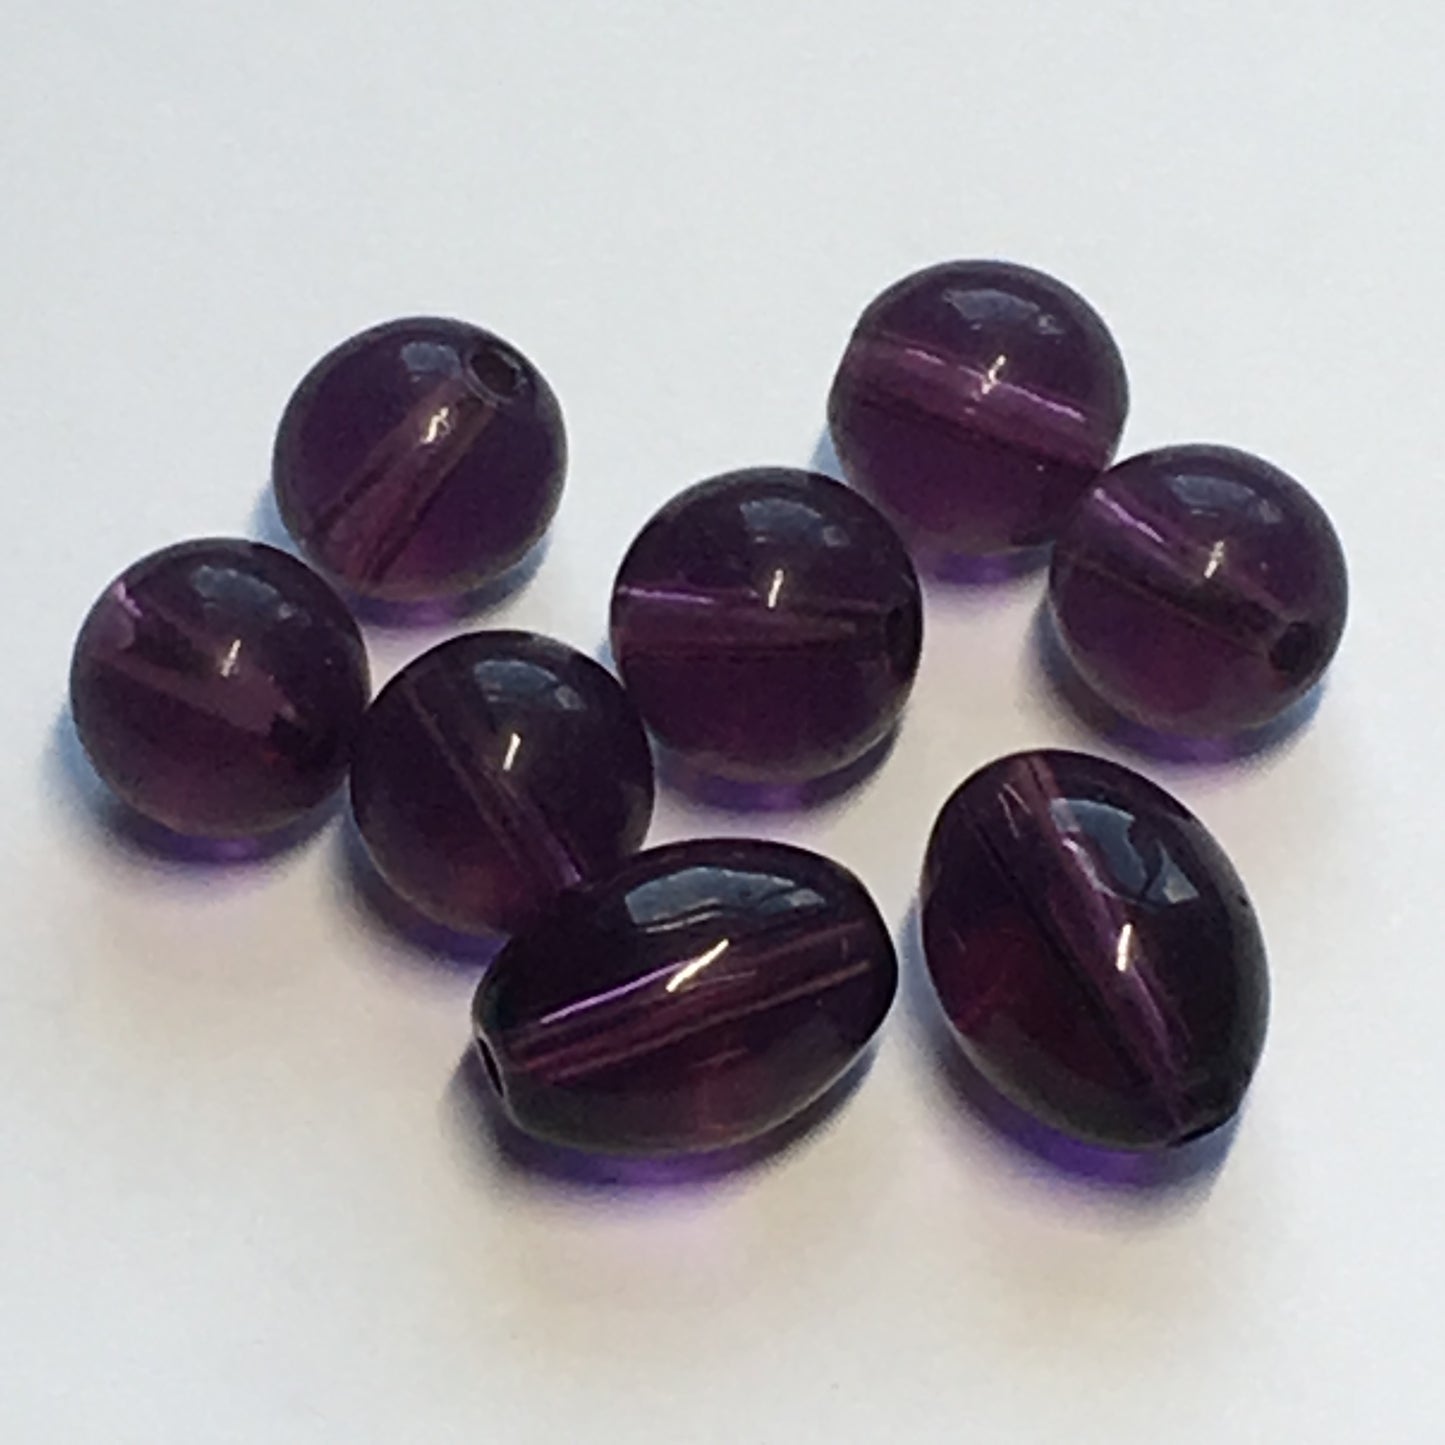 Transparent Dark Purple Round and Oval Glass Beads, 11 x 8  and 8 mm, 8 Beads